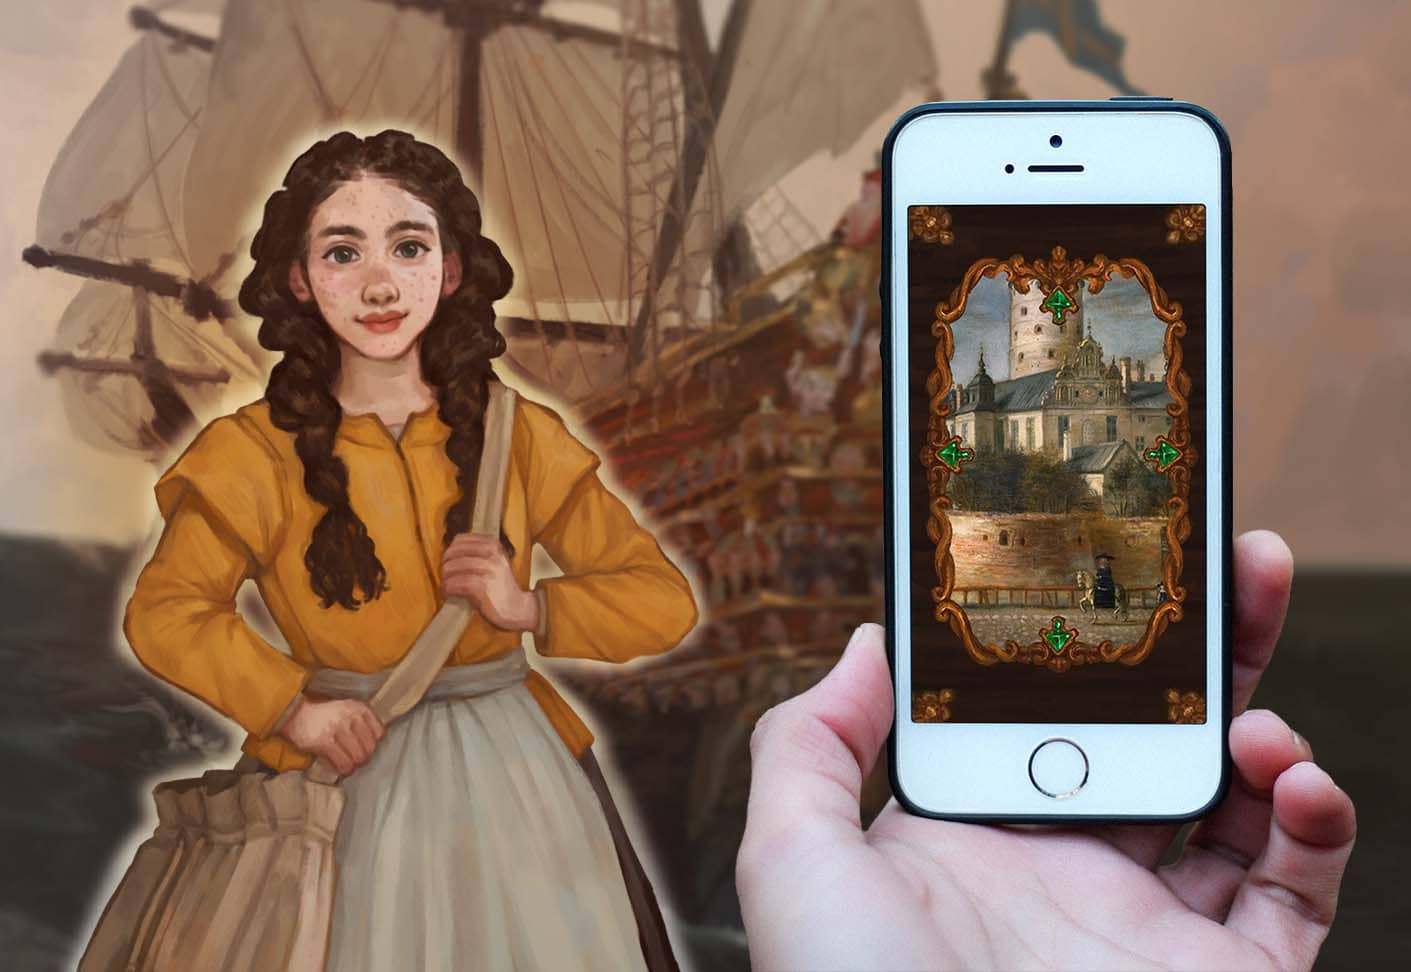 An illustration of Agnes with the Vasa ship in the background. A hand is holding a mobile phone, on the screen is a painting of the royal palace.